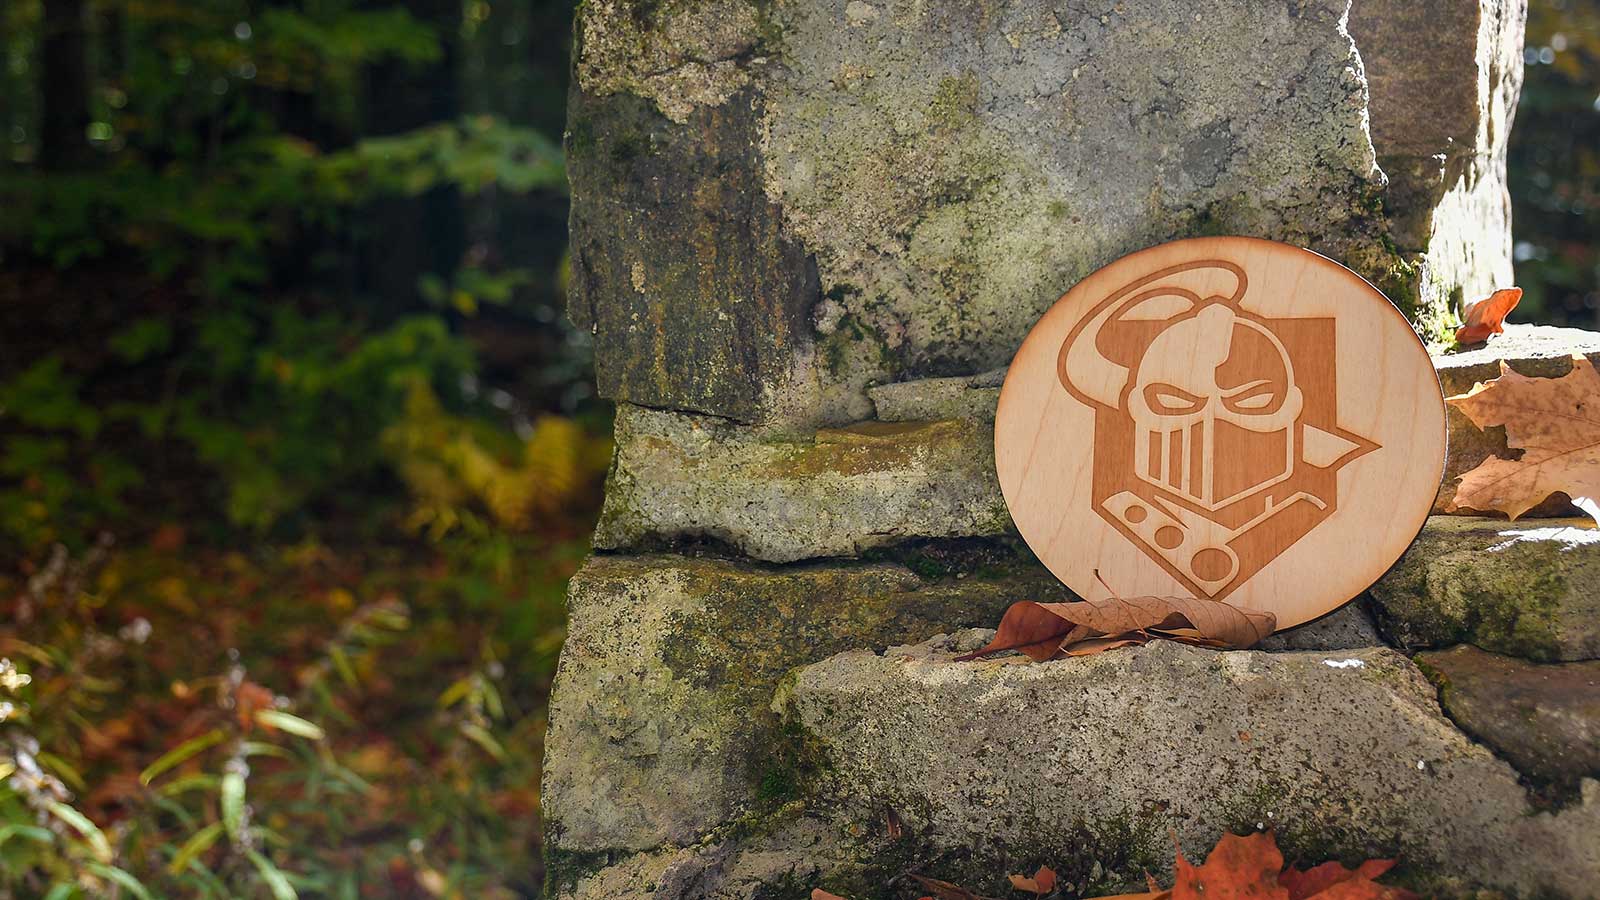 Wooden circle with  Golden Knight logo on it set on natural rocks and plants.